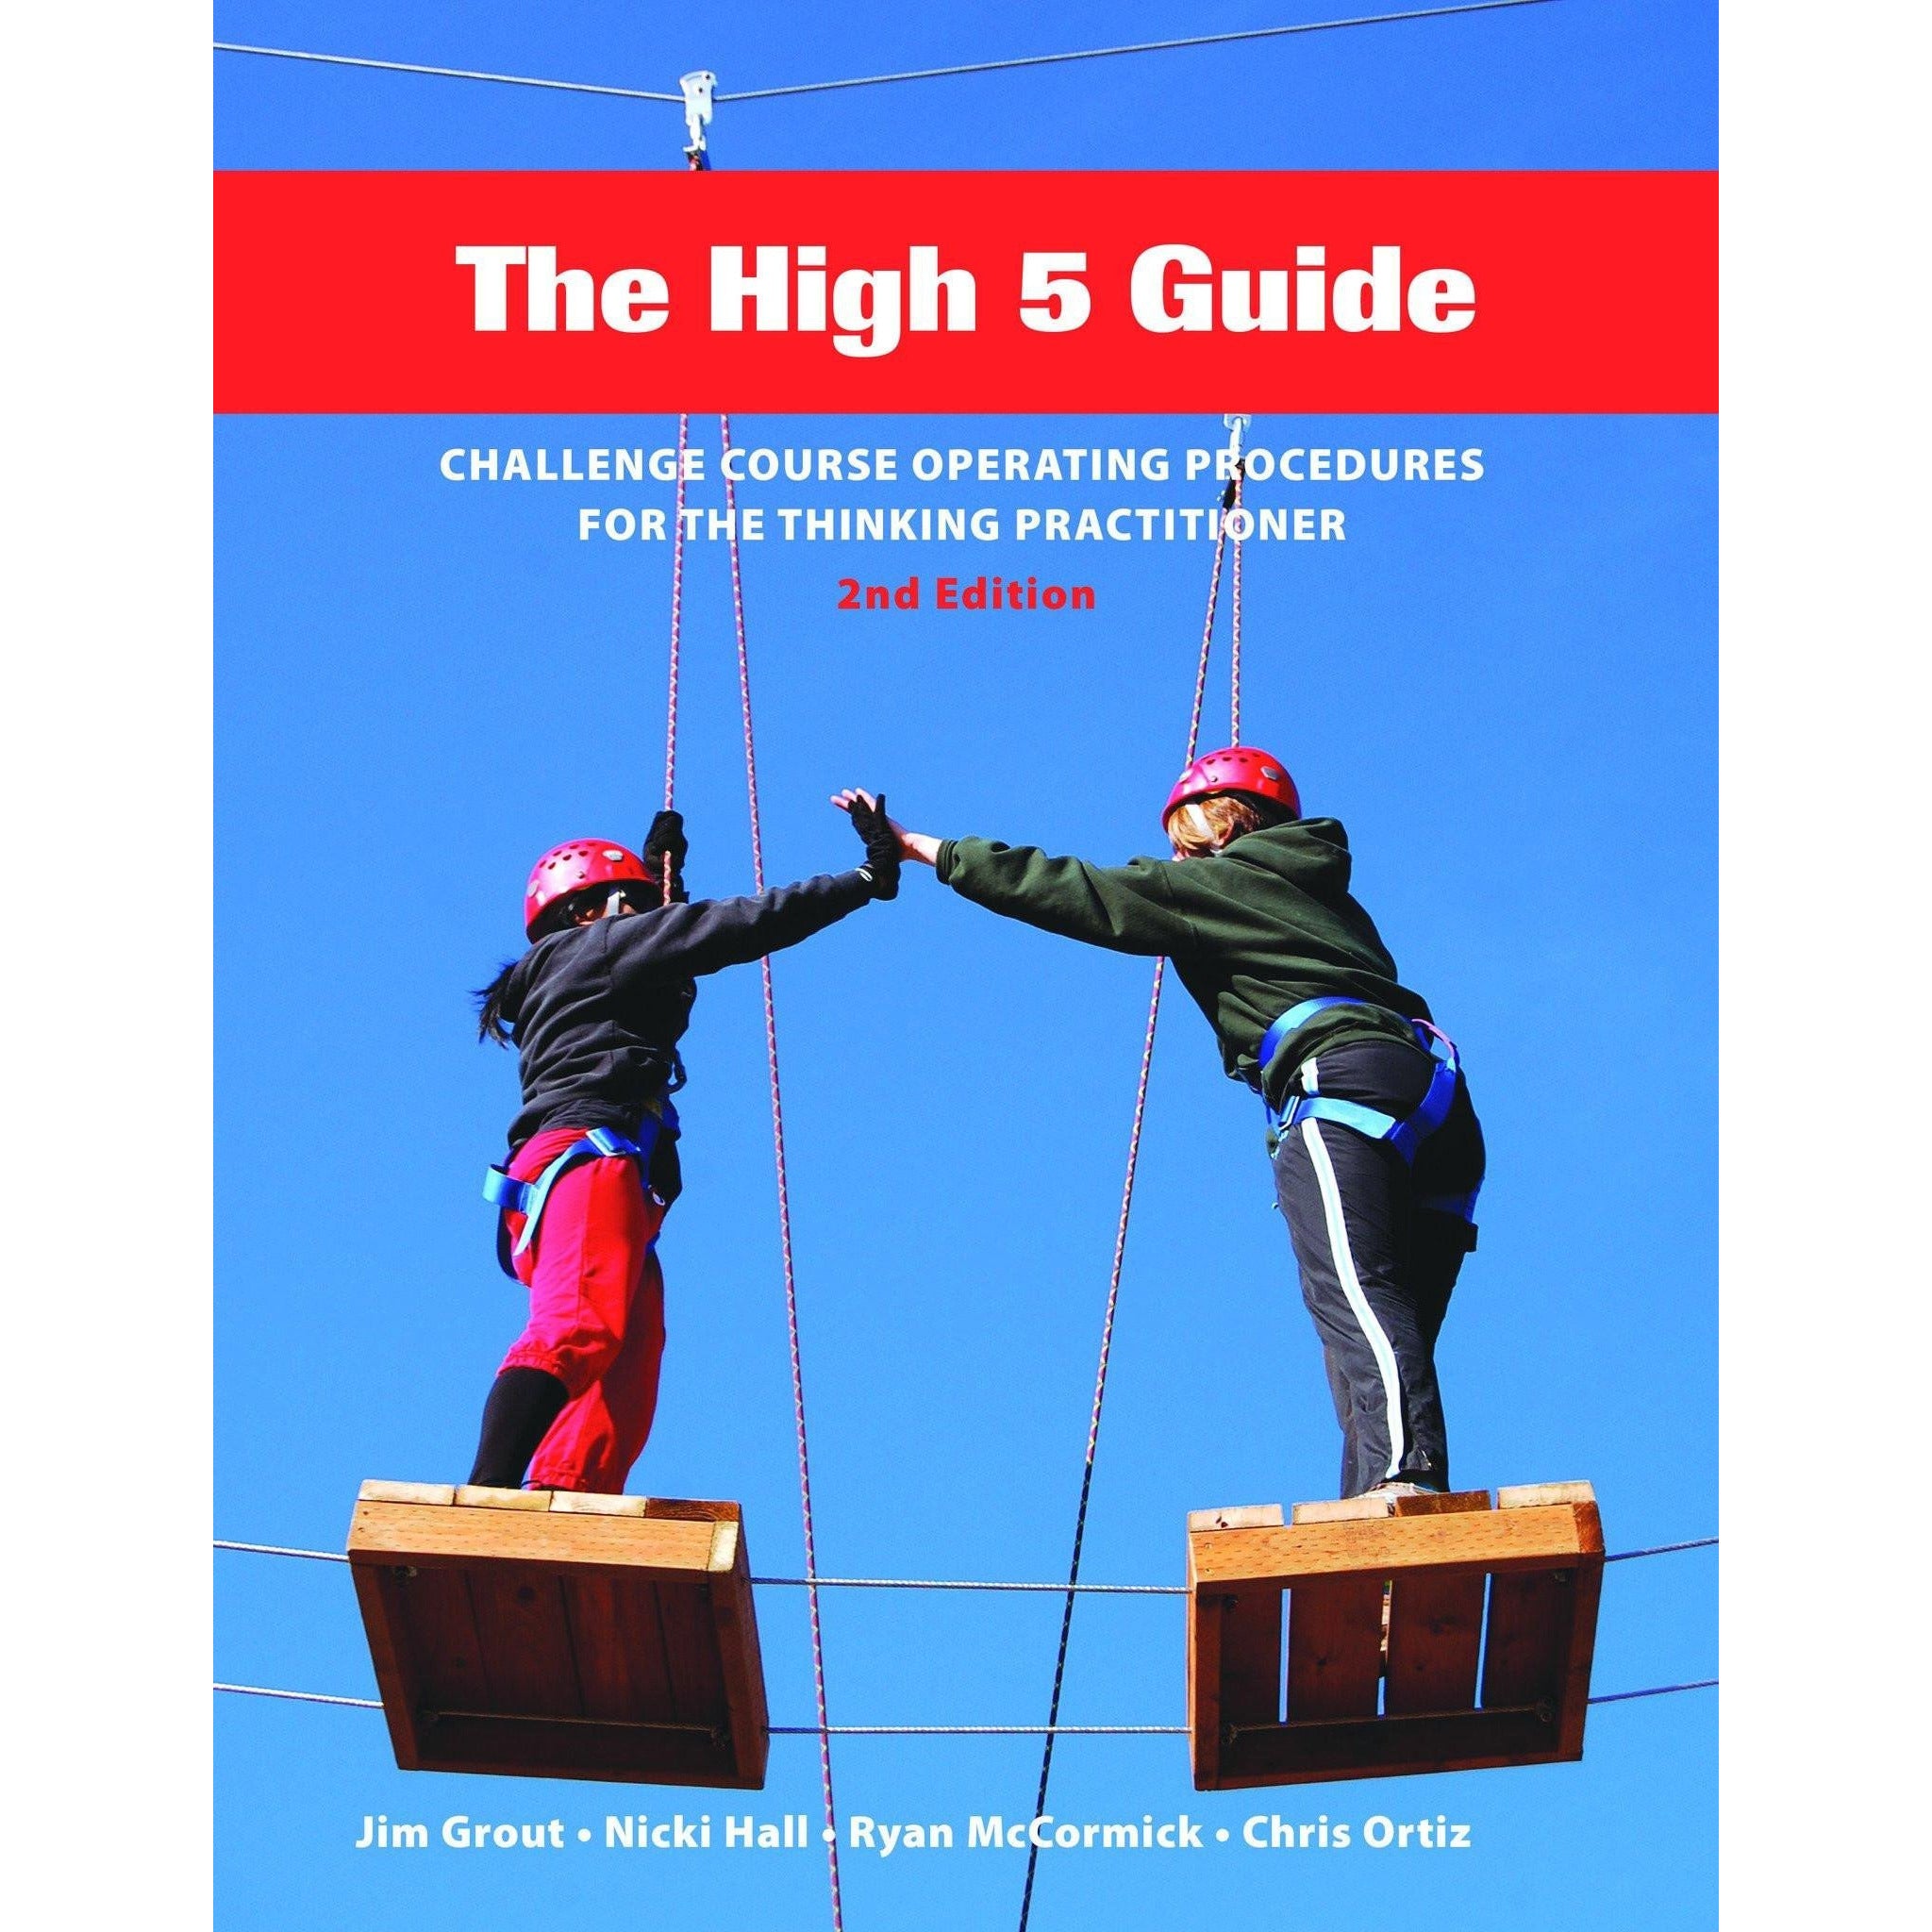 Training Wheels The High 5 Guide Book, 2nd Edition - Aerial Adventure Tech